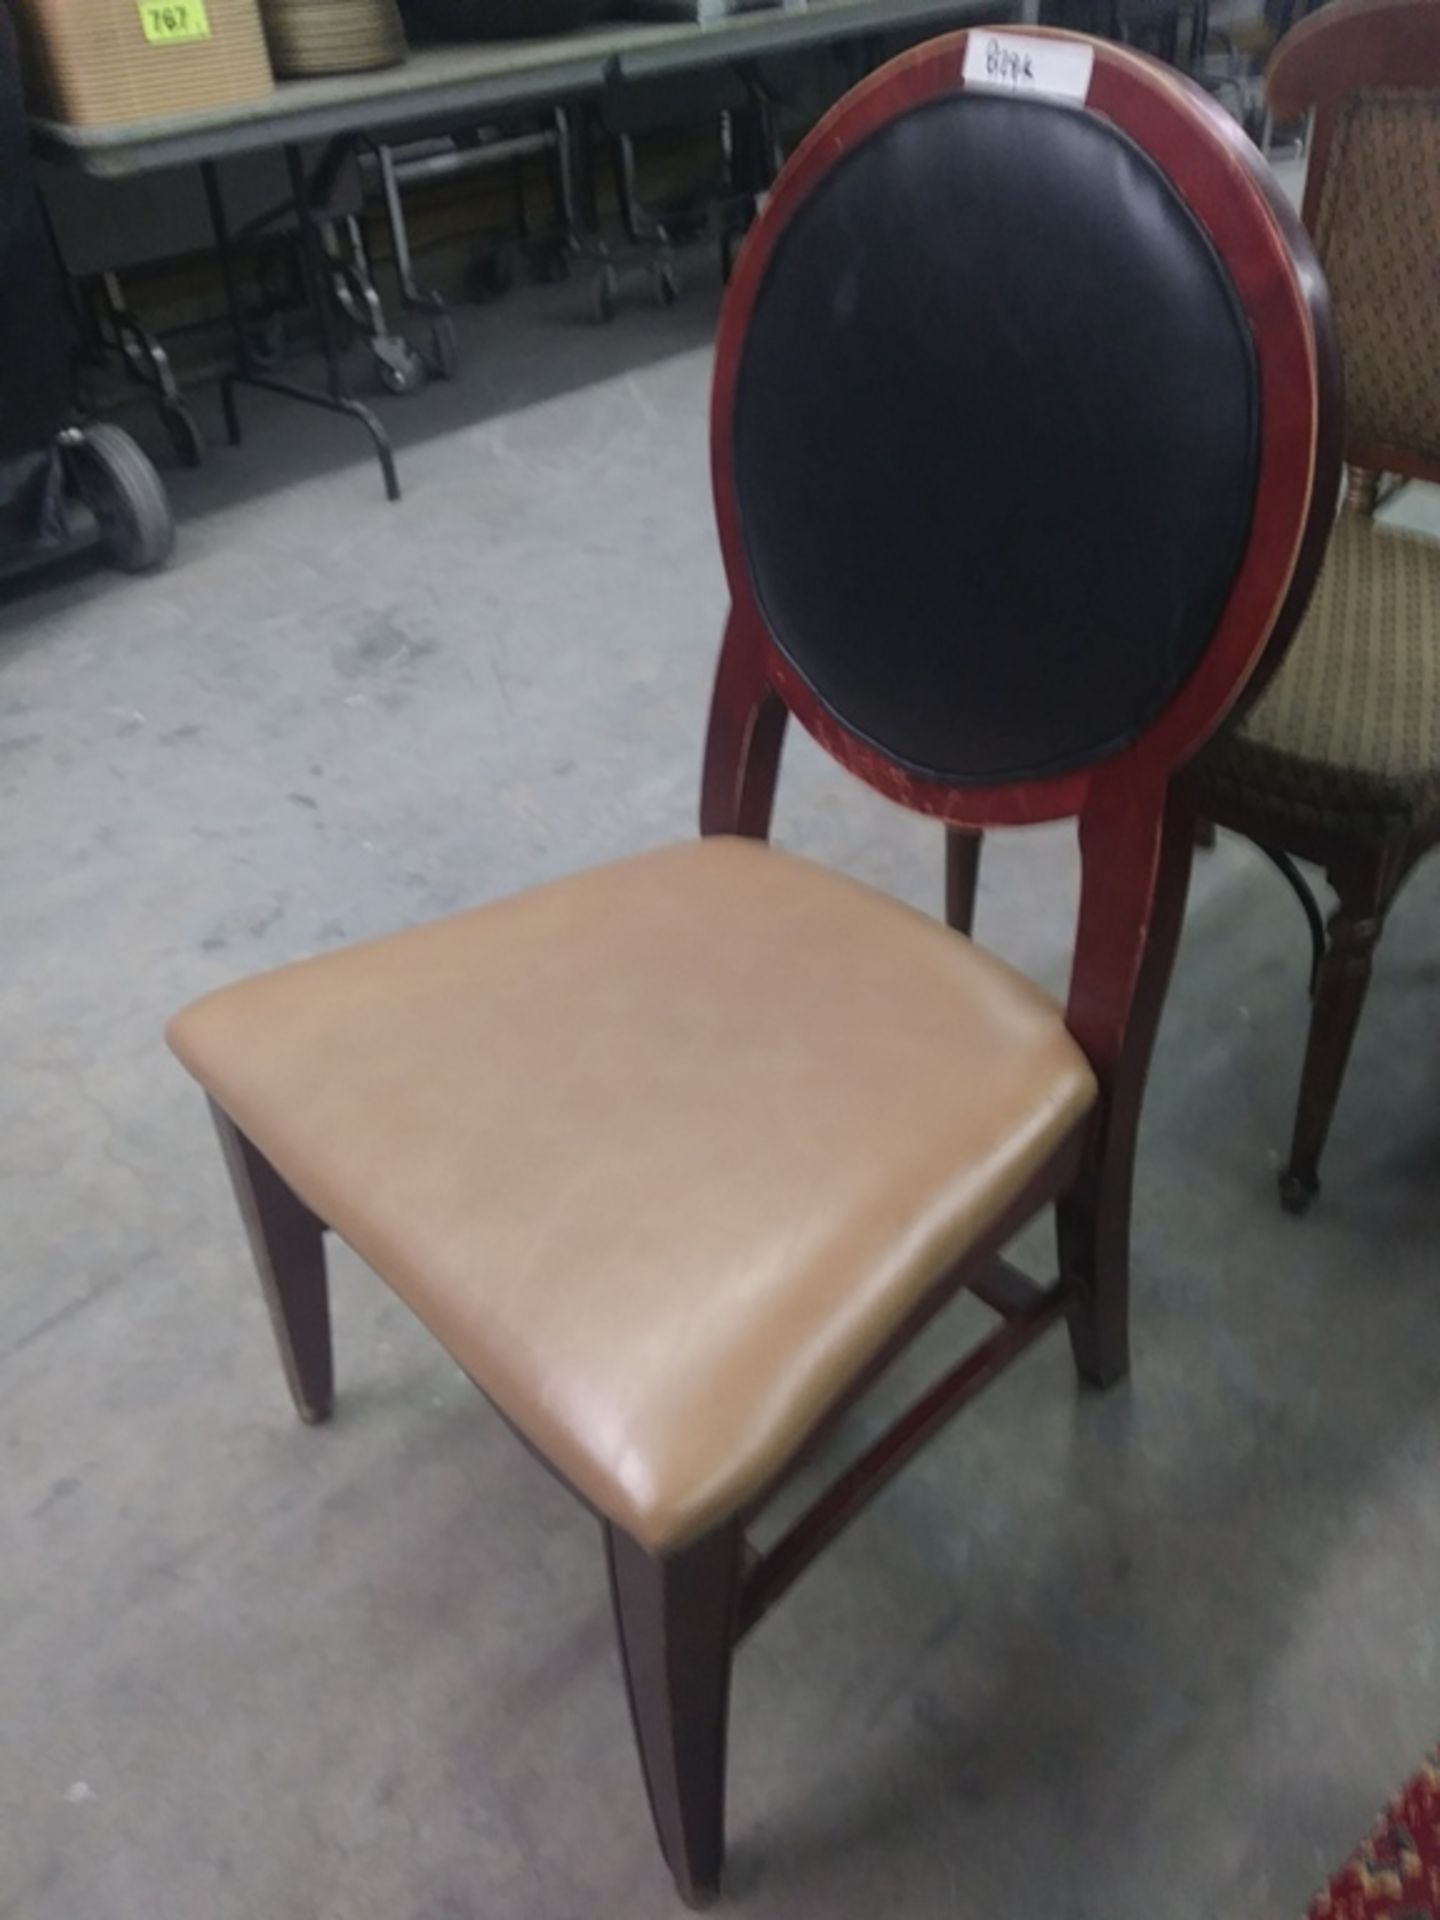 BLACK / TAN LEATHER DINING CHAIR / WOODEN FRAME (QTY X MONEY) - Image 3 of 4